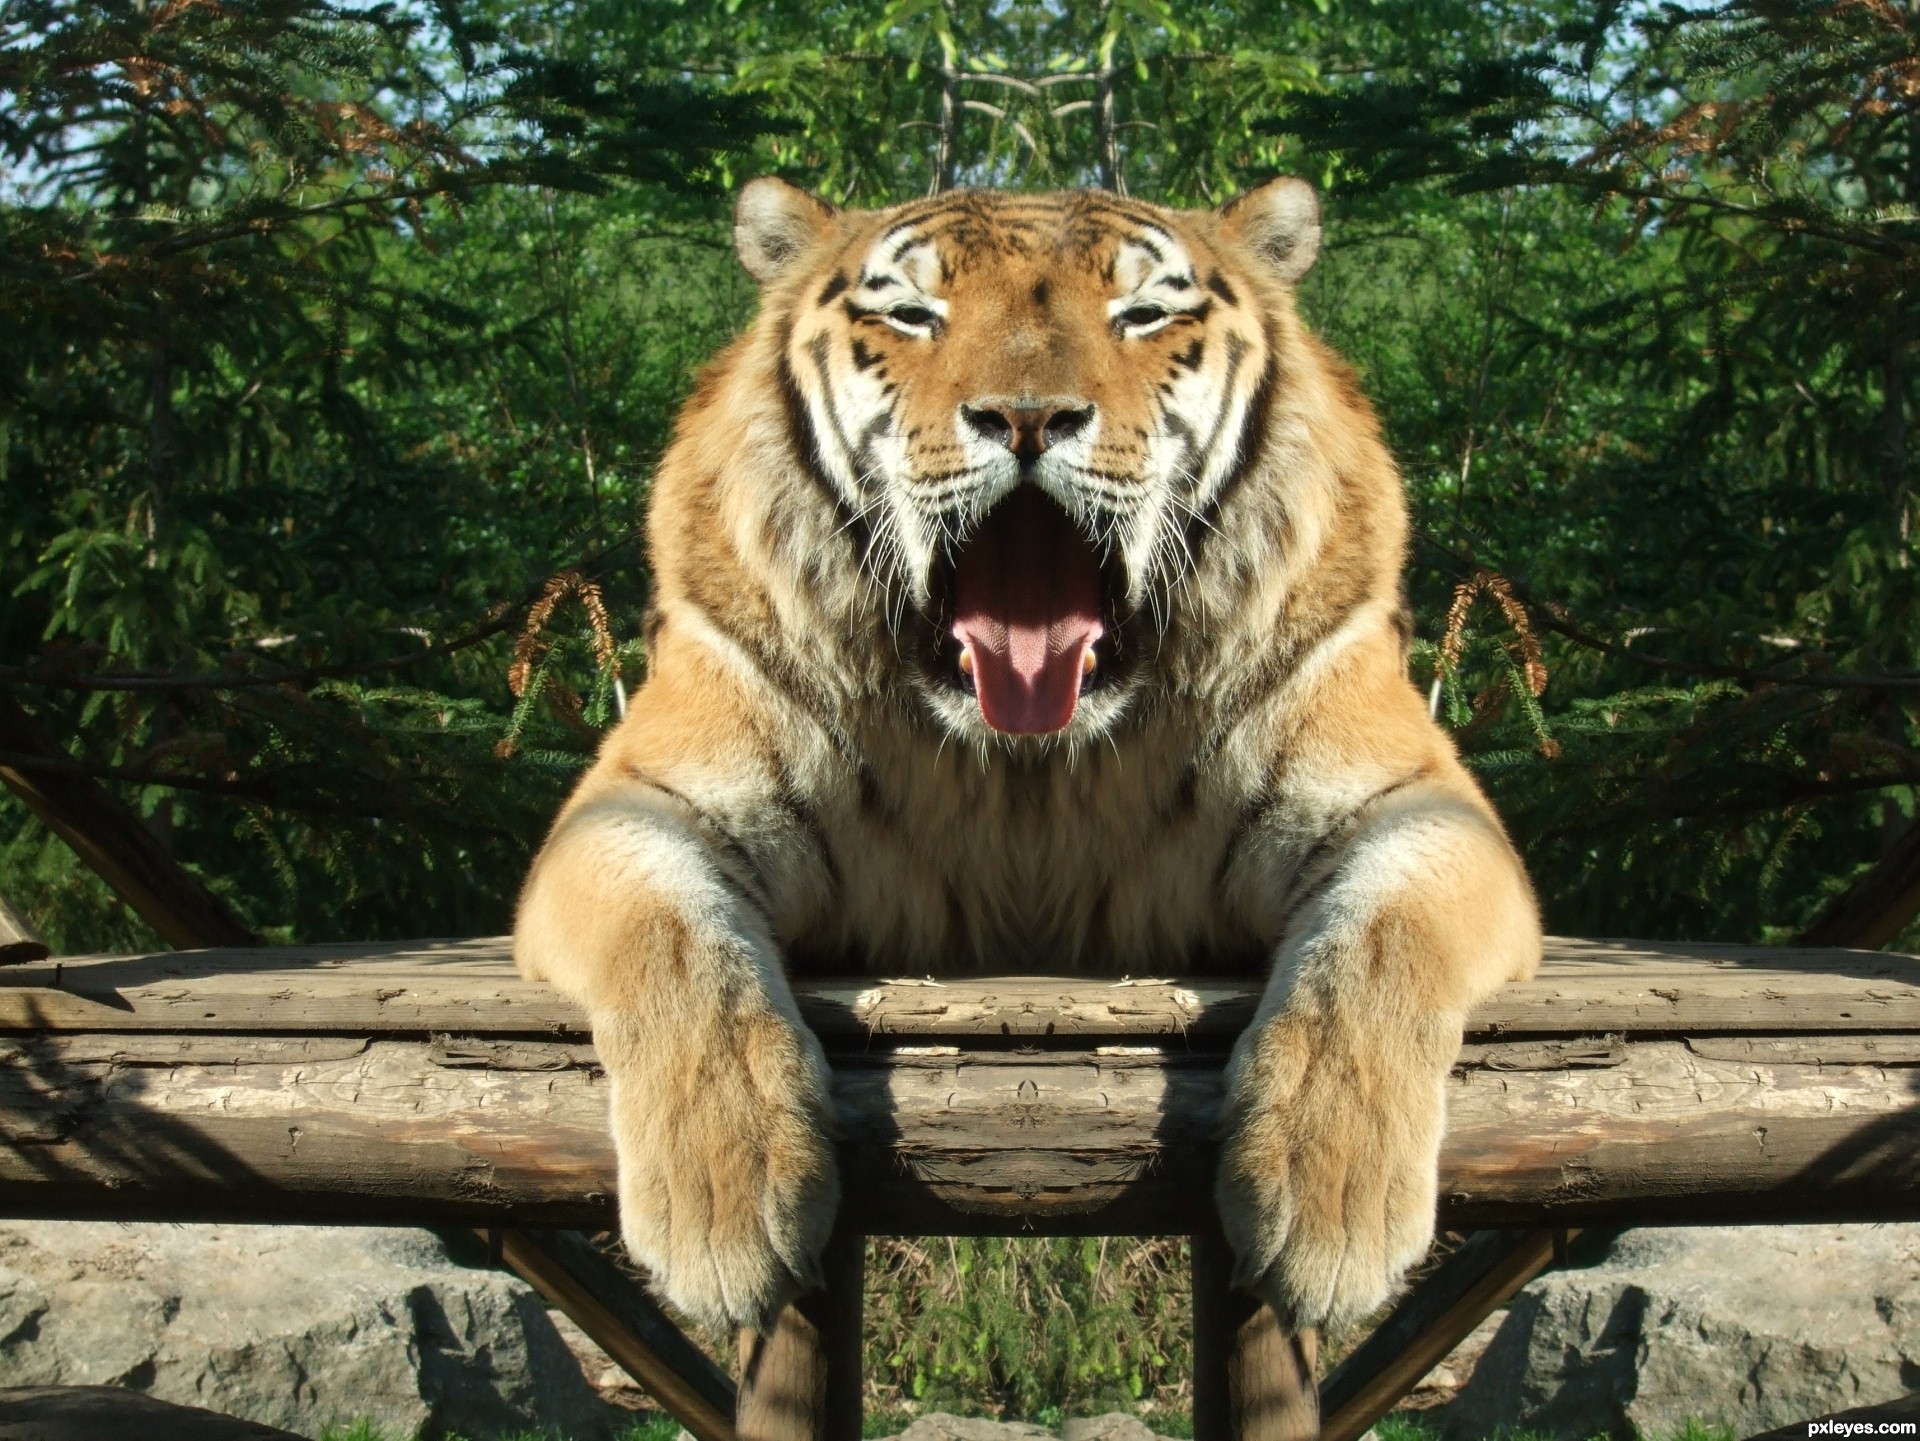 Relaxing Tiger picture, by kb for: symmetrical world photography ...